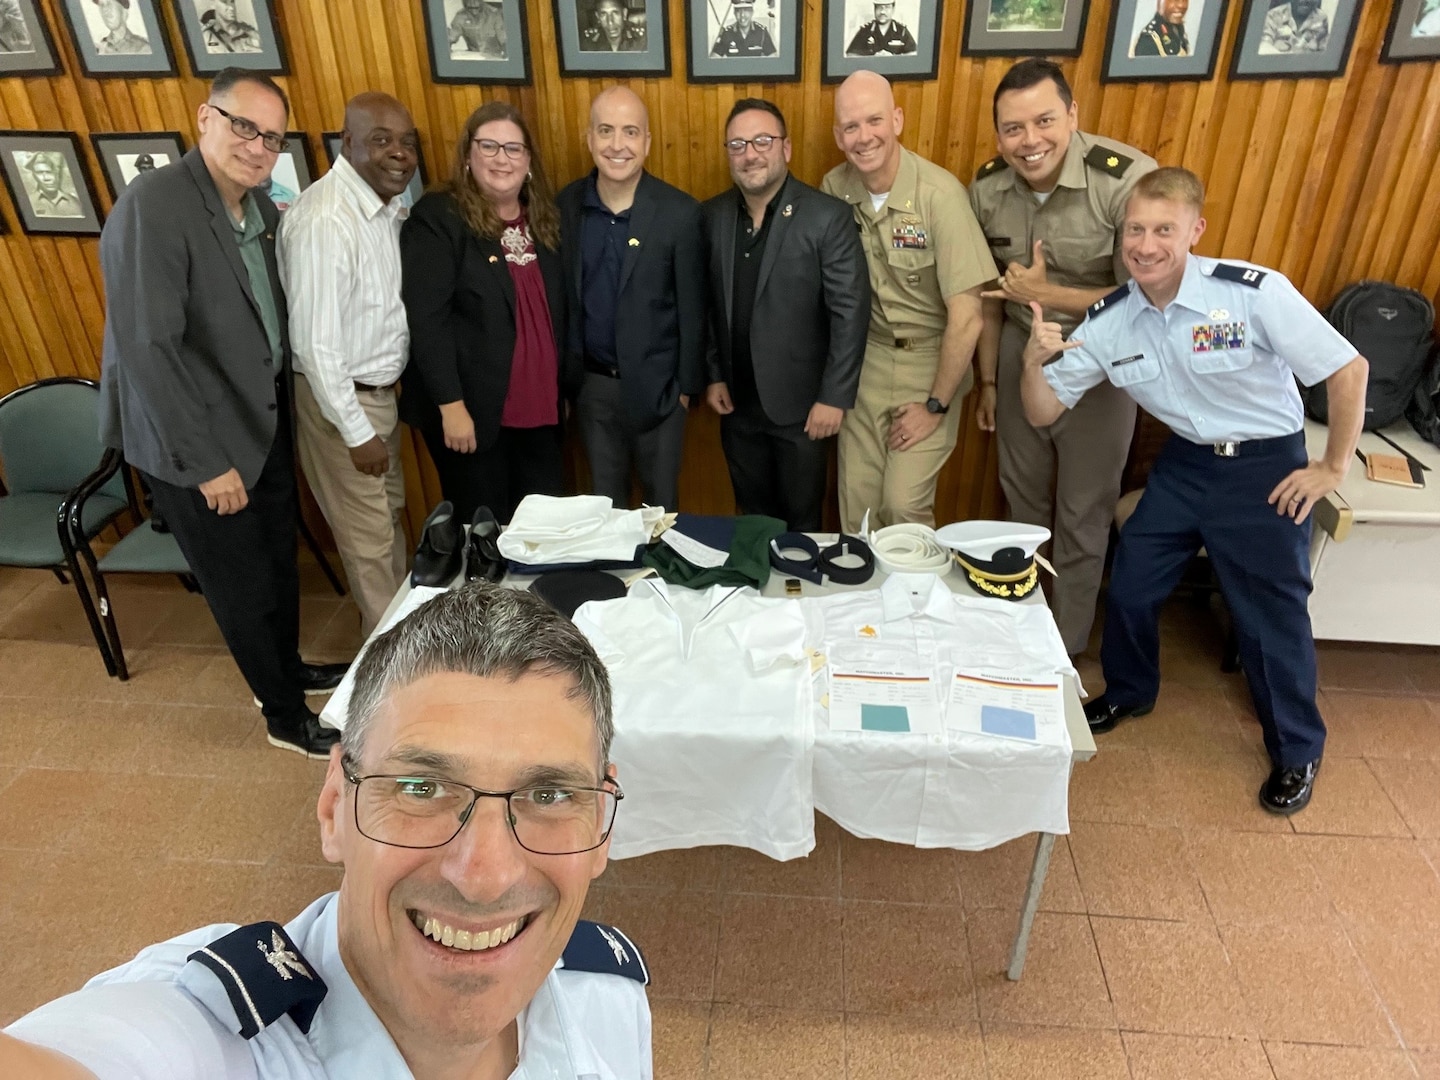 uniformed man takes selfie with other uniformed and civilian men and women